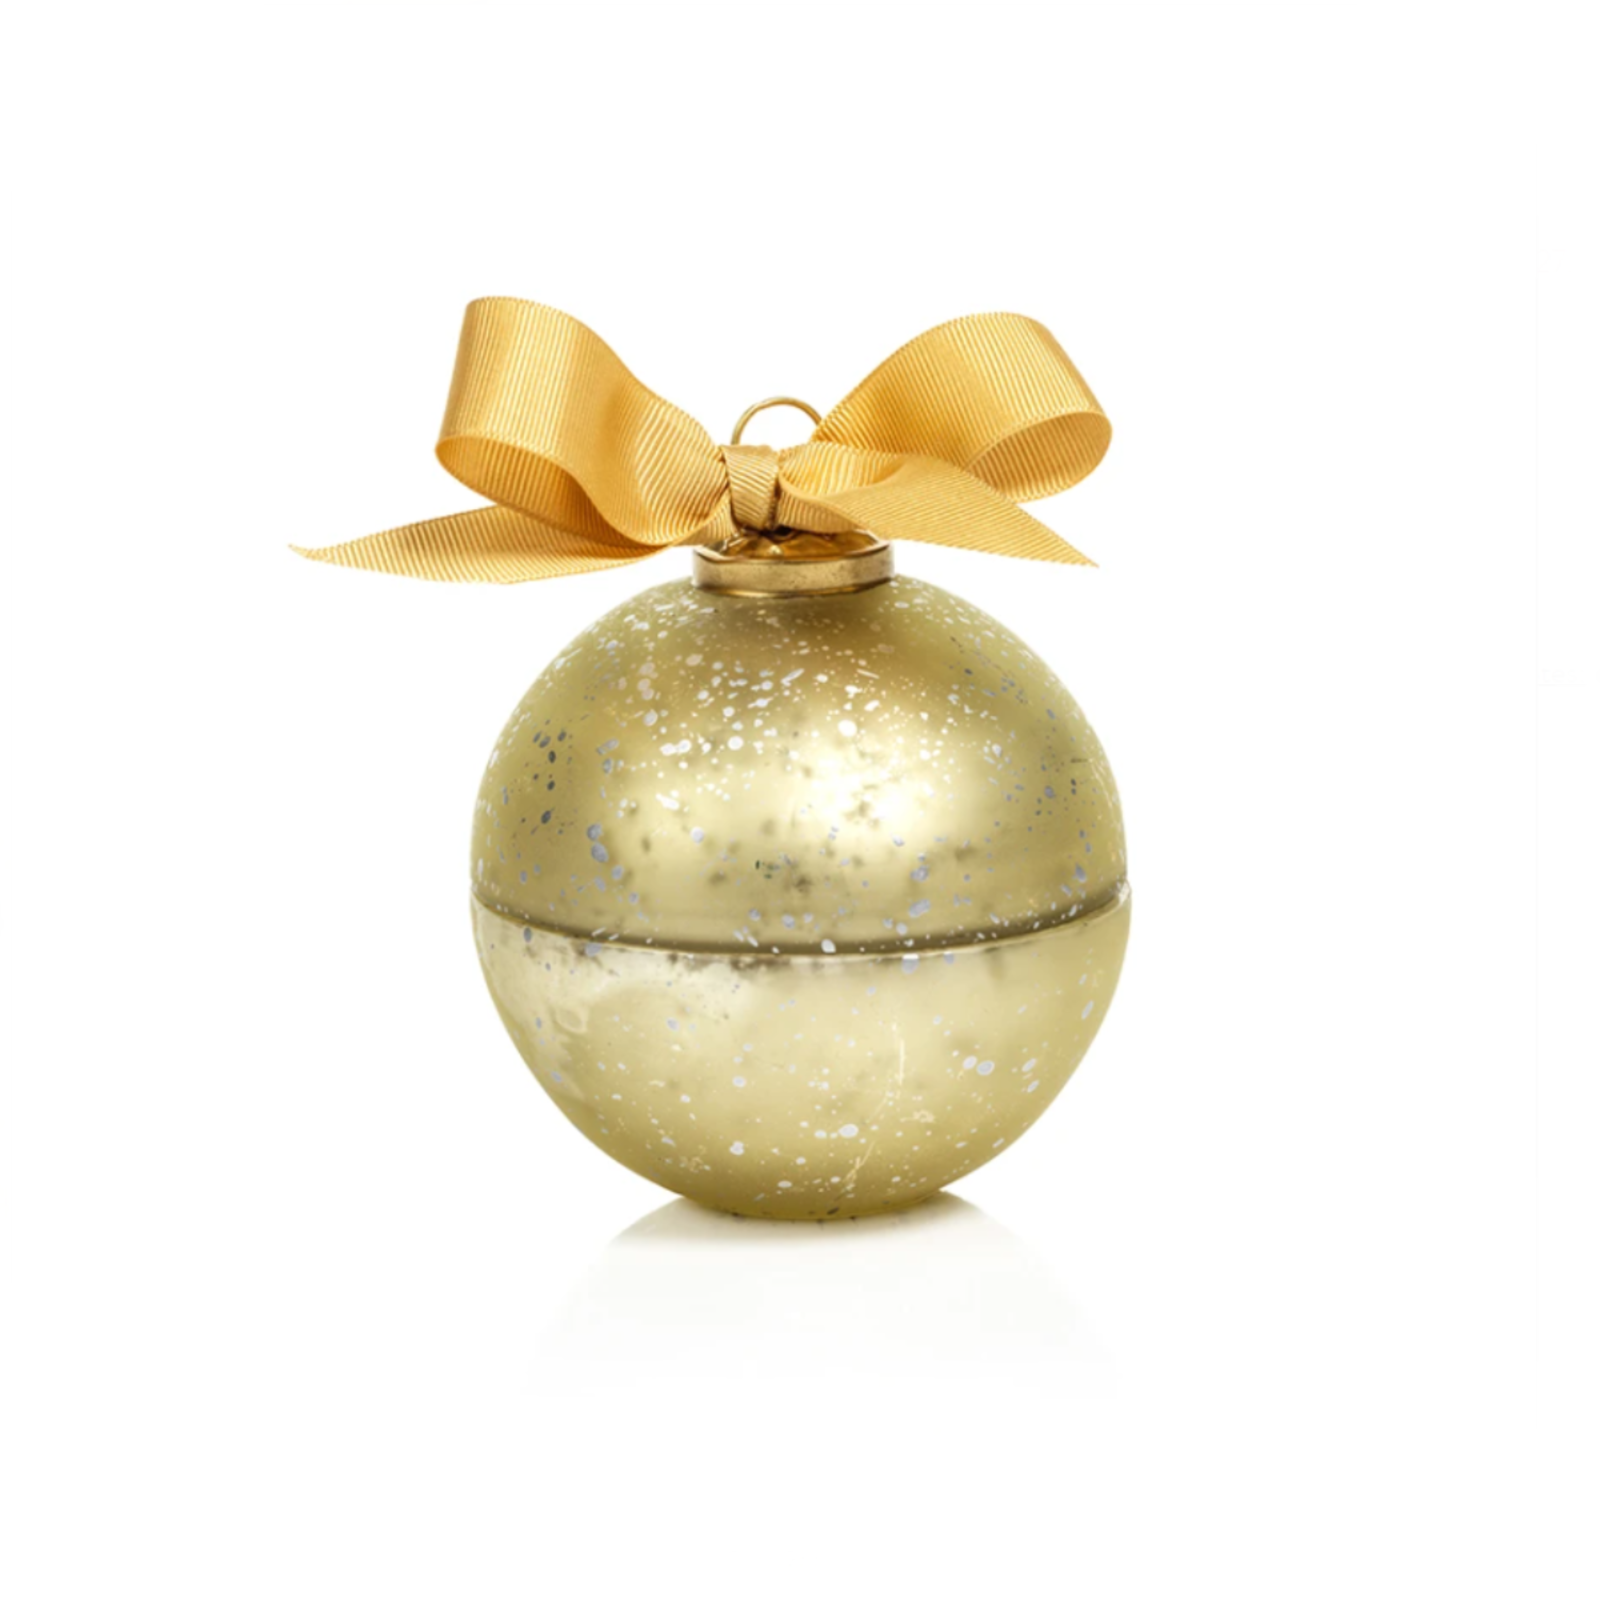 Zodax Scented Candle Ornament Gold IG-2602 loading=